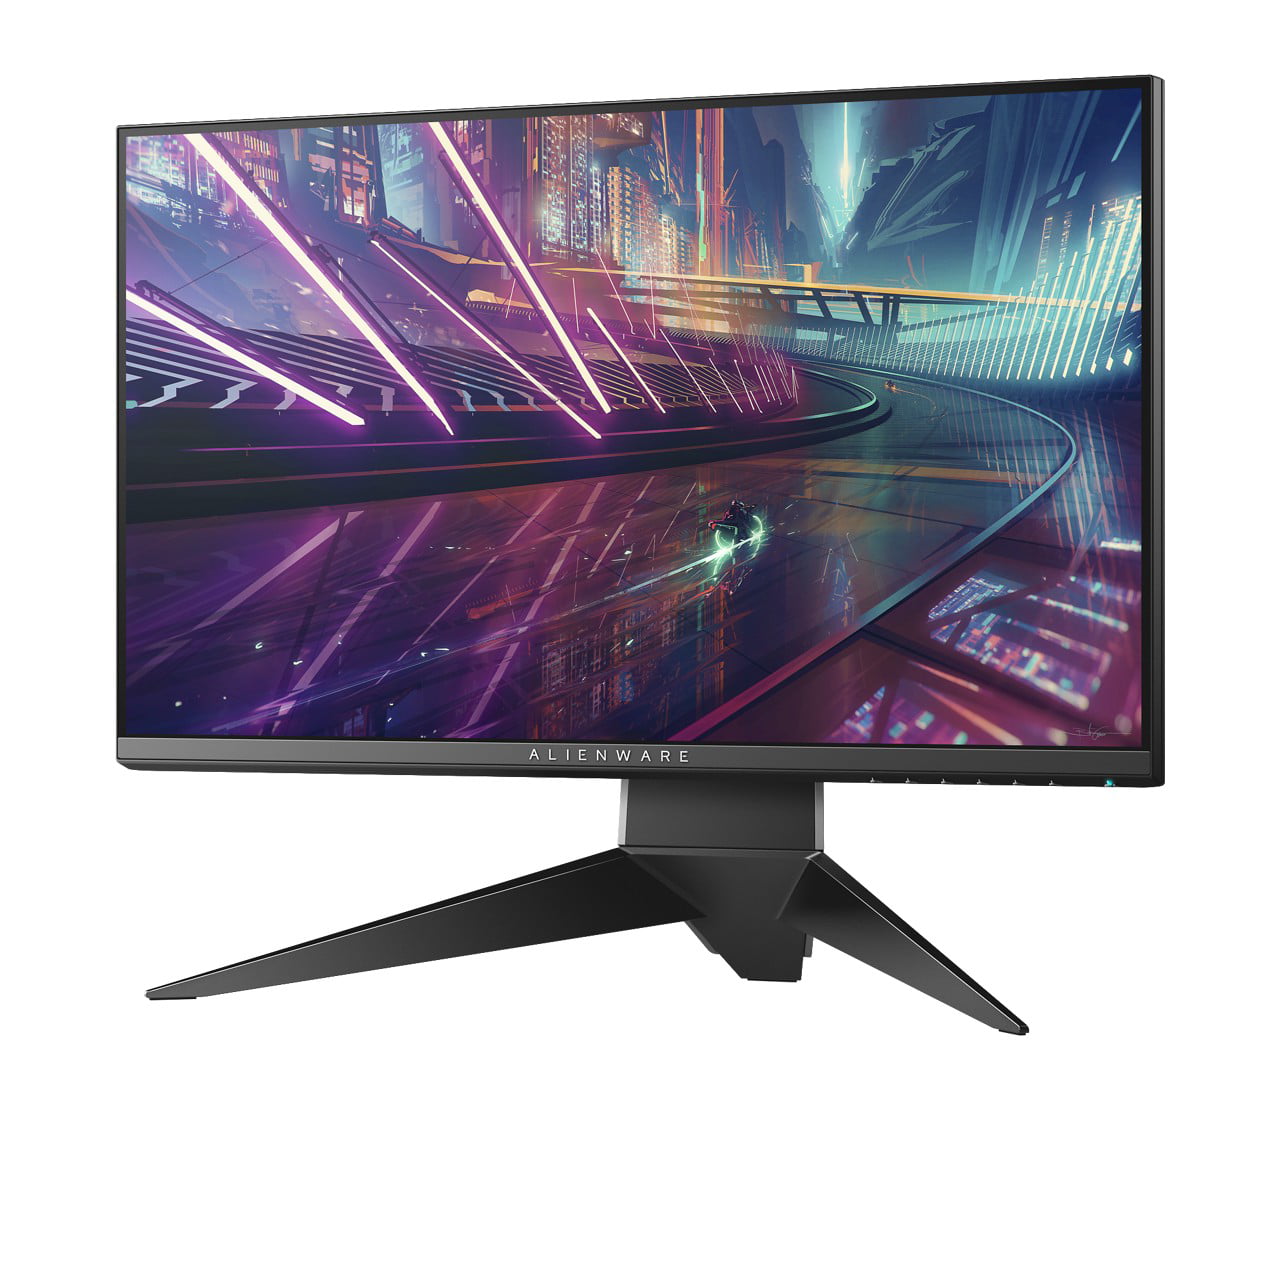 Photo 1 of LCD CRACKED, Dell Alienware AW2518HF 24.5" LCD Gaming Monitor - 240Hz Refresh Rate - 1920 x 1080 FHD Display - AMD FreeSync Technology - Twisted Nematic Panel